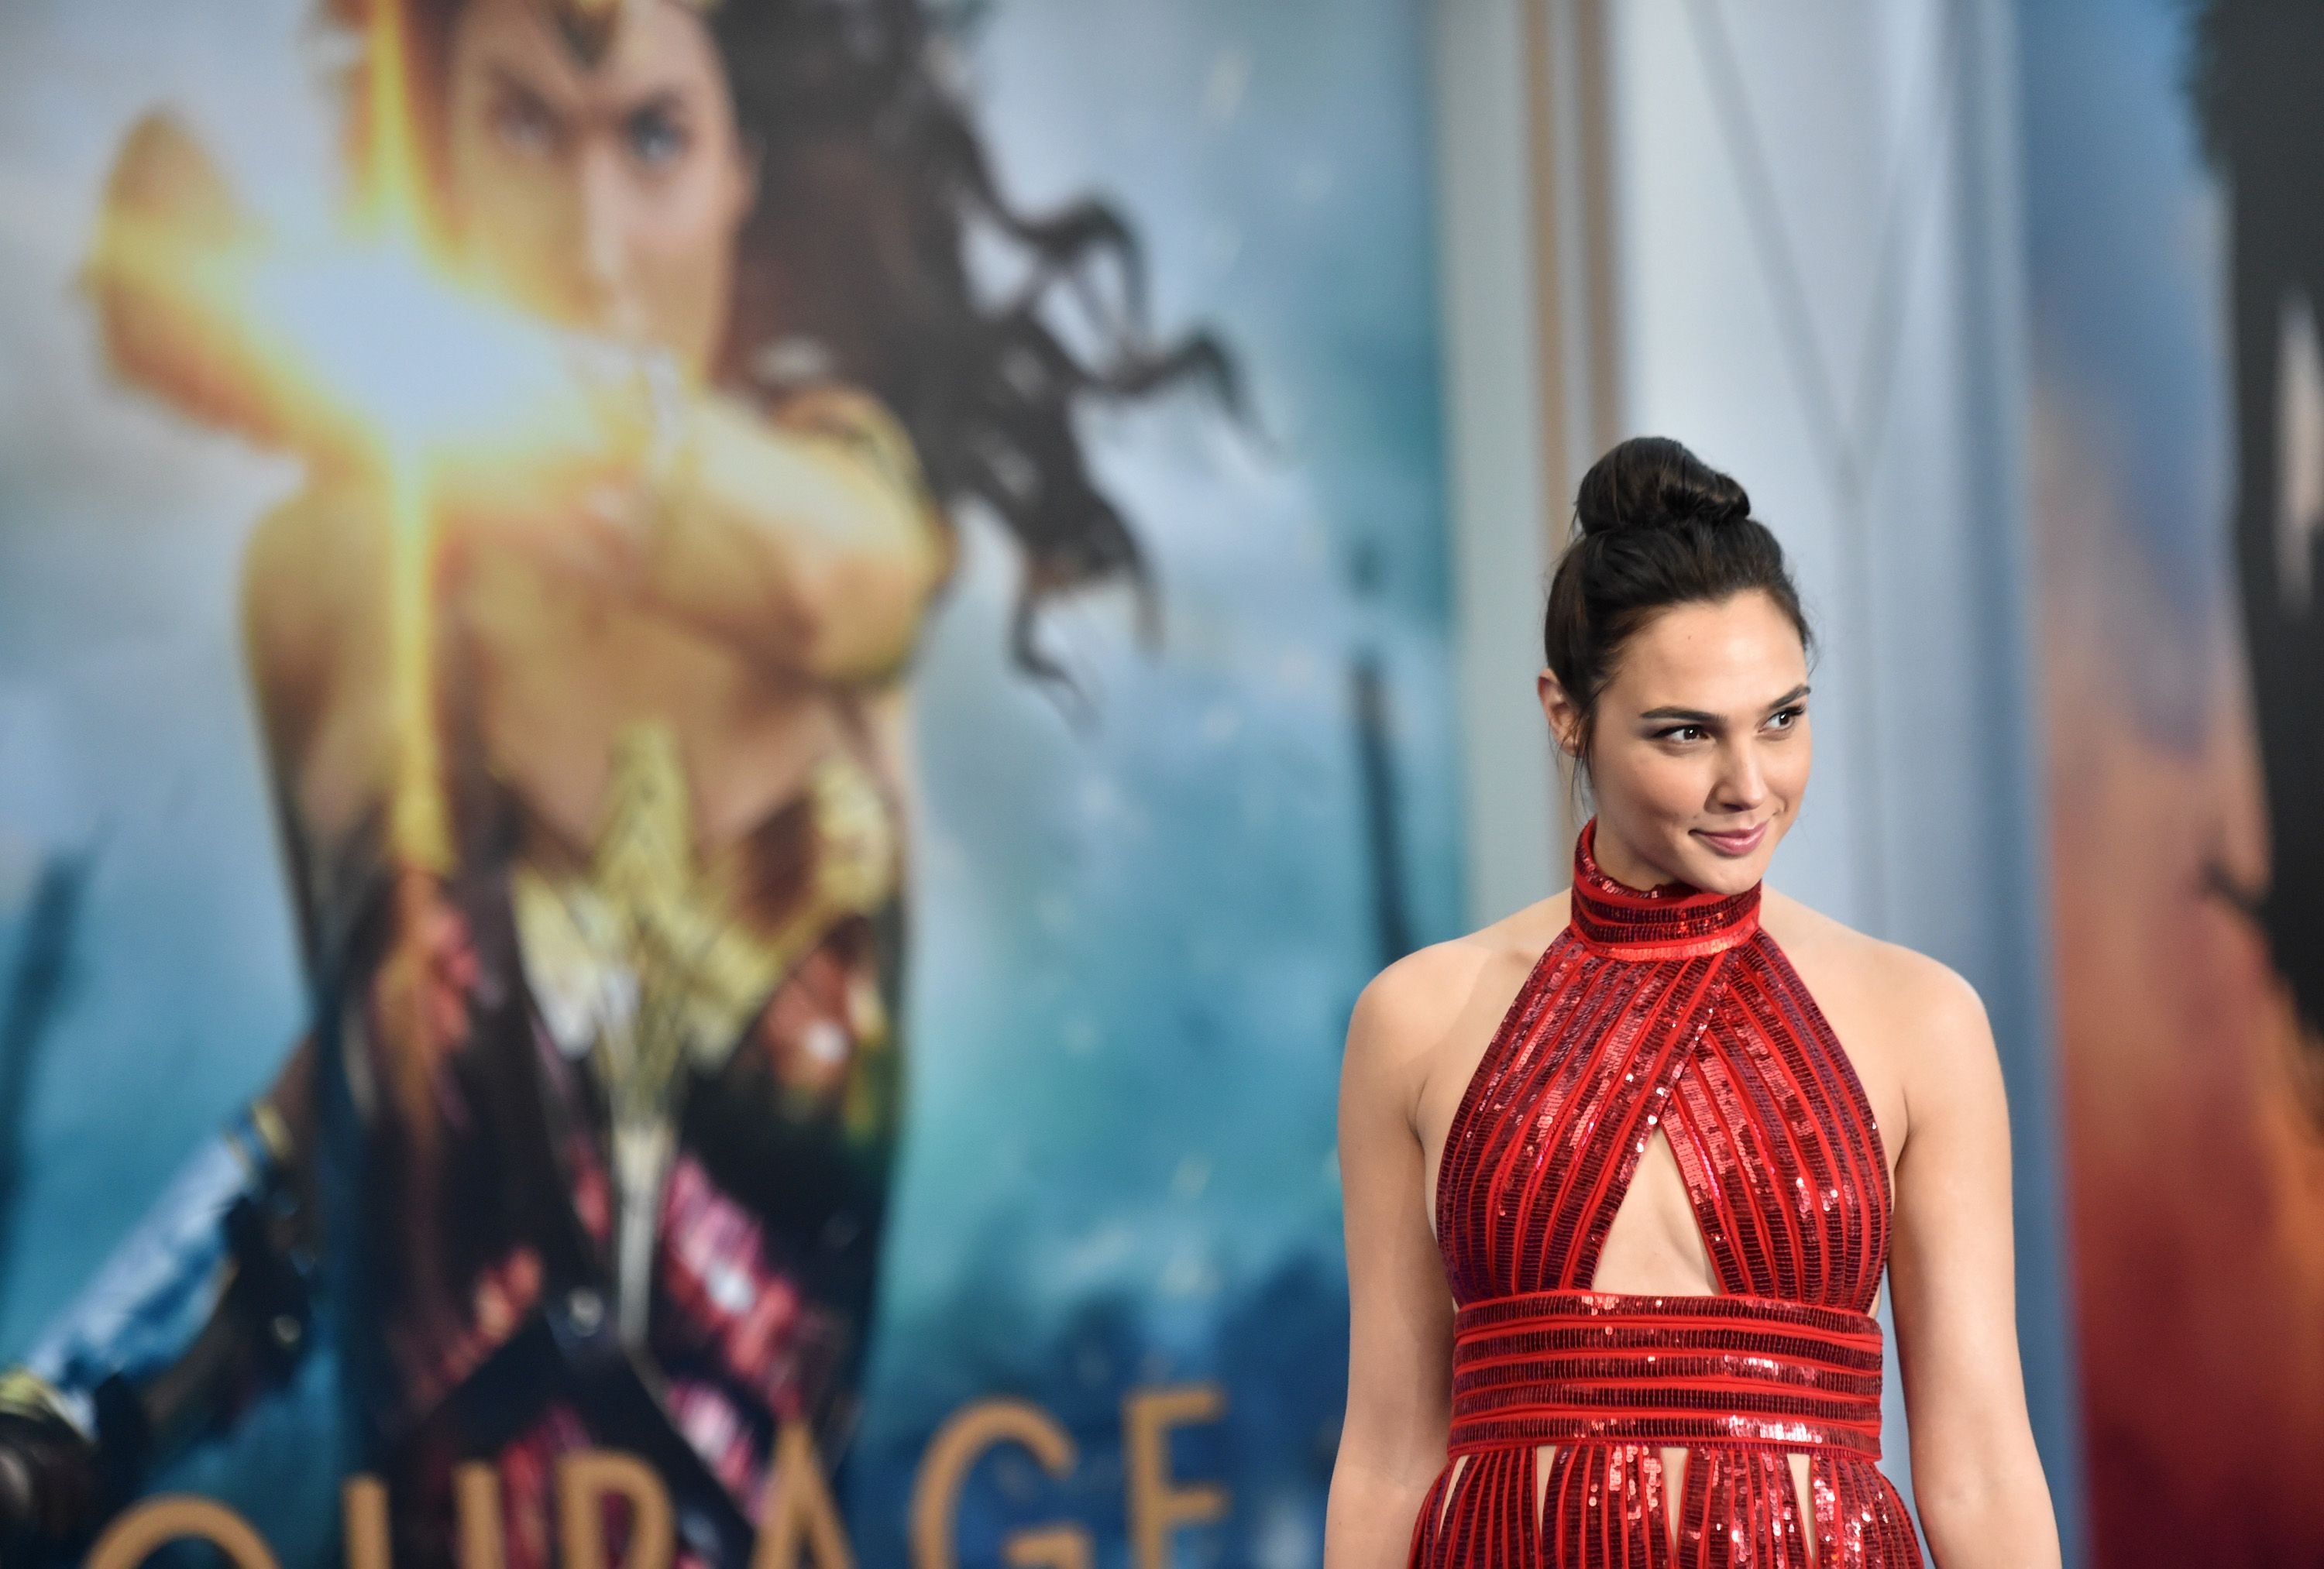 Gal Gadot at the premiere of "Wonder Woman" in 2017 in Hollywood, California | Source: Getty Images